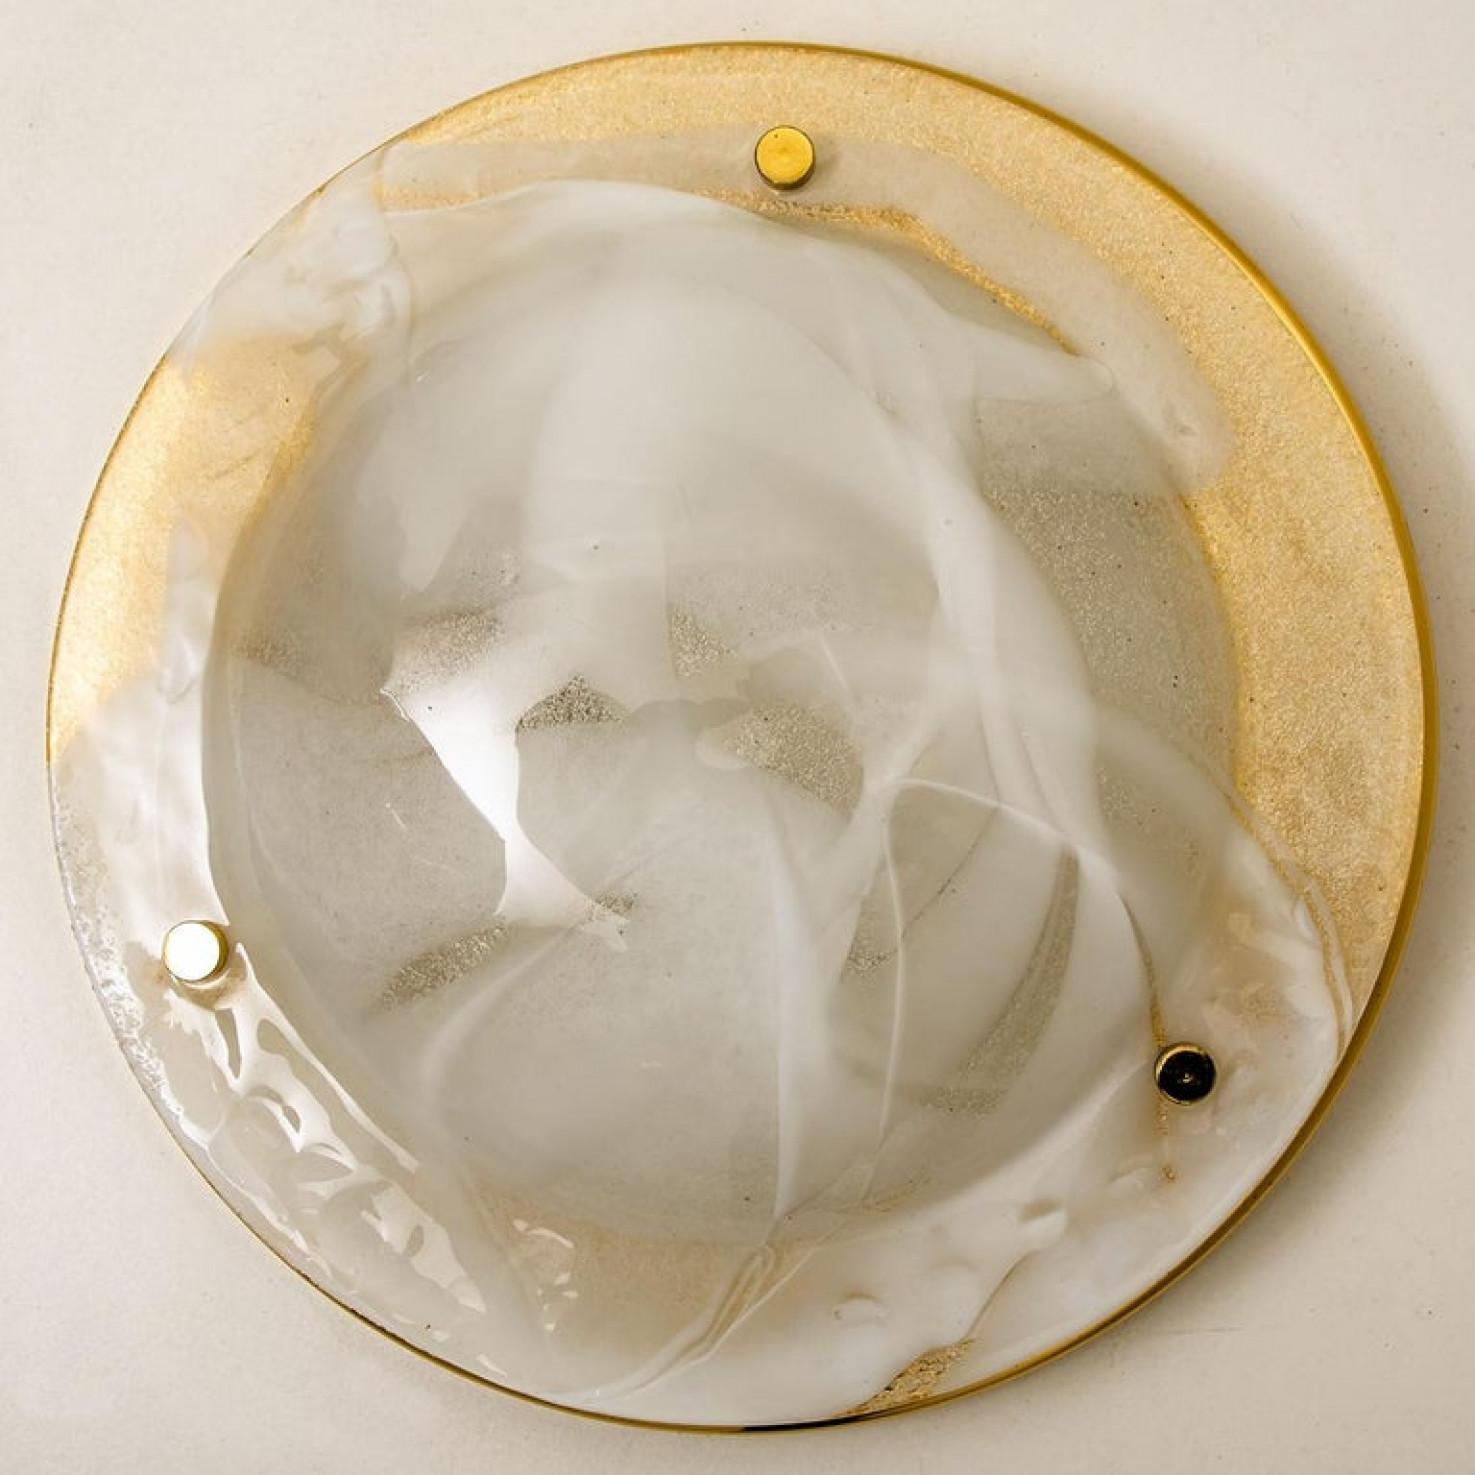 High-end brass and Murano glass wall lights or flush mount by Hillebrand. Manufactured in the late 1960s-early 1970s. The brass ring holds a large heavy blown glass with three brass brackets. The think glass has a beautiful textured structure. With